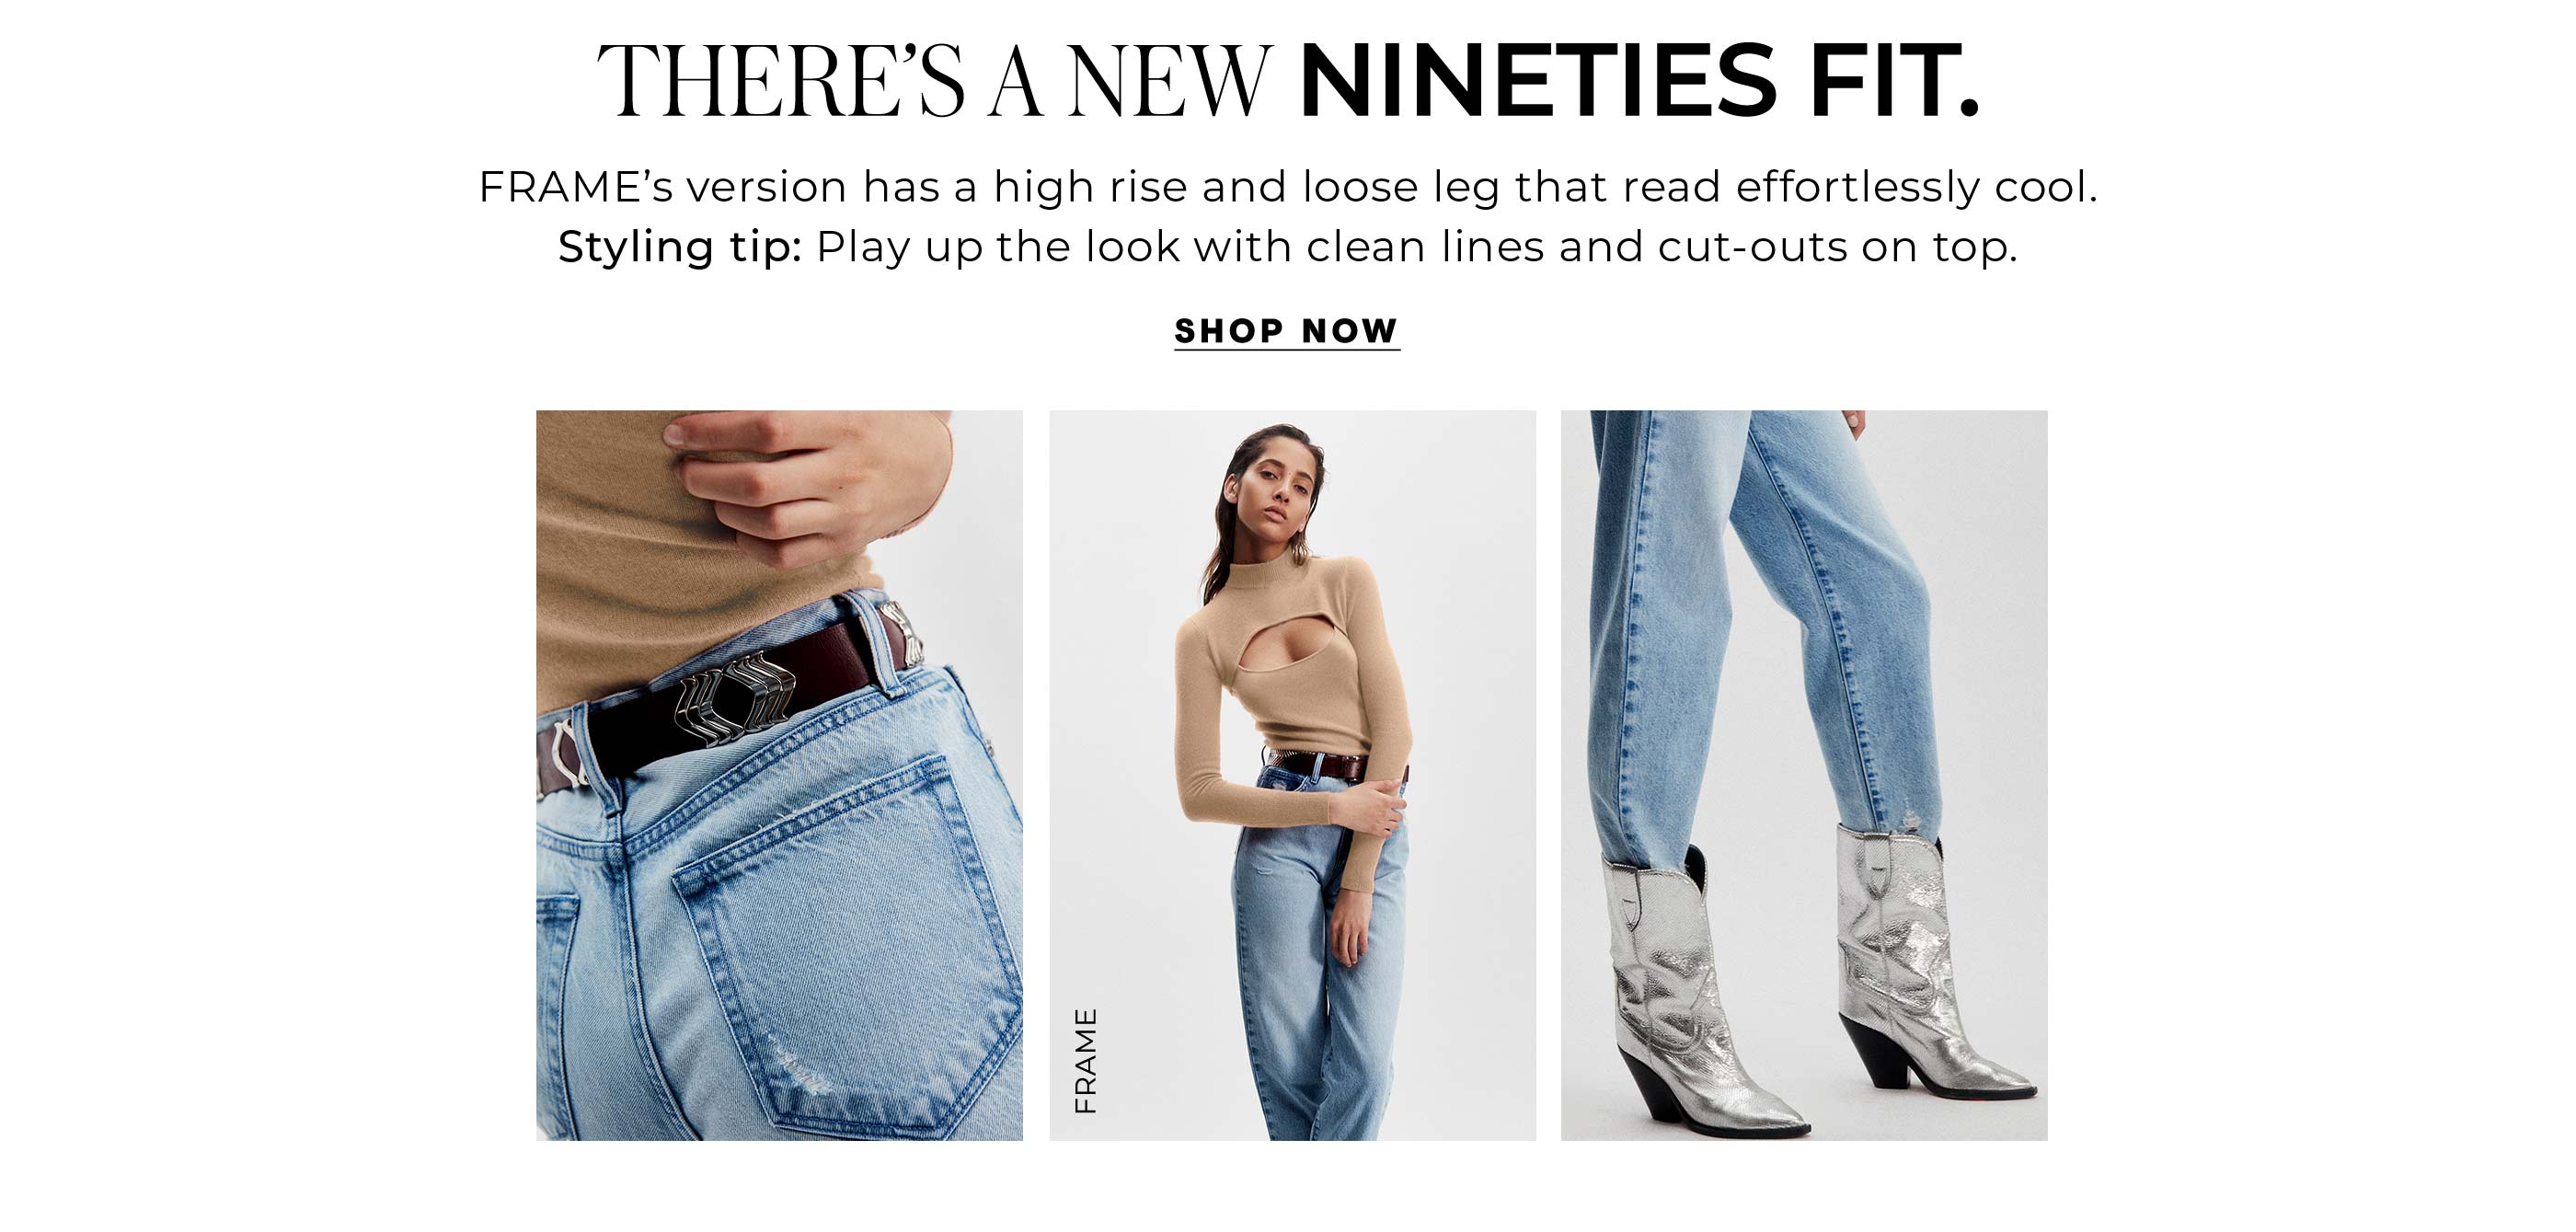 "There’s A New Nineties Fit. FRAME’s version has a high rise and loose leg that read effortlessly cool. Styling tip: Play up the look with a clean-lines and cut outs on top."